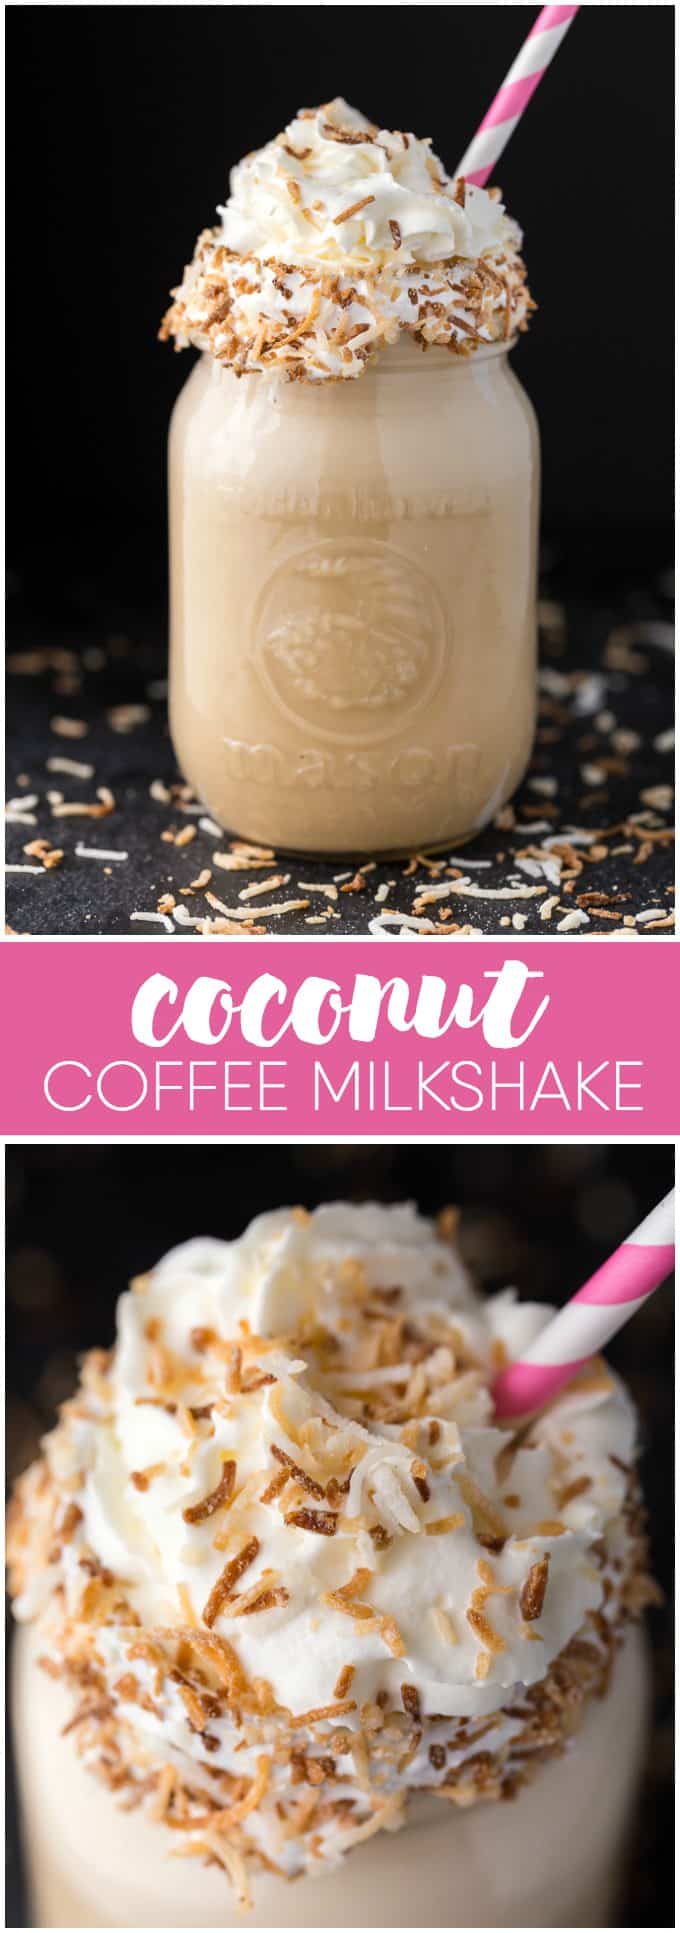 Coconut Coffee Milkshake - The coconut-ty flavour will remind you of your favourite macaroon cookie.  A cold and delicious treat on a warm day.